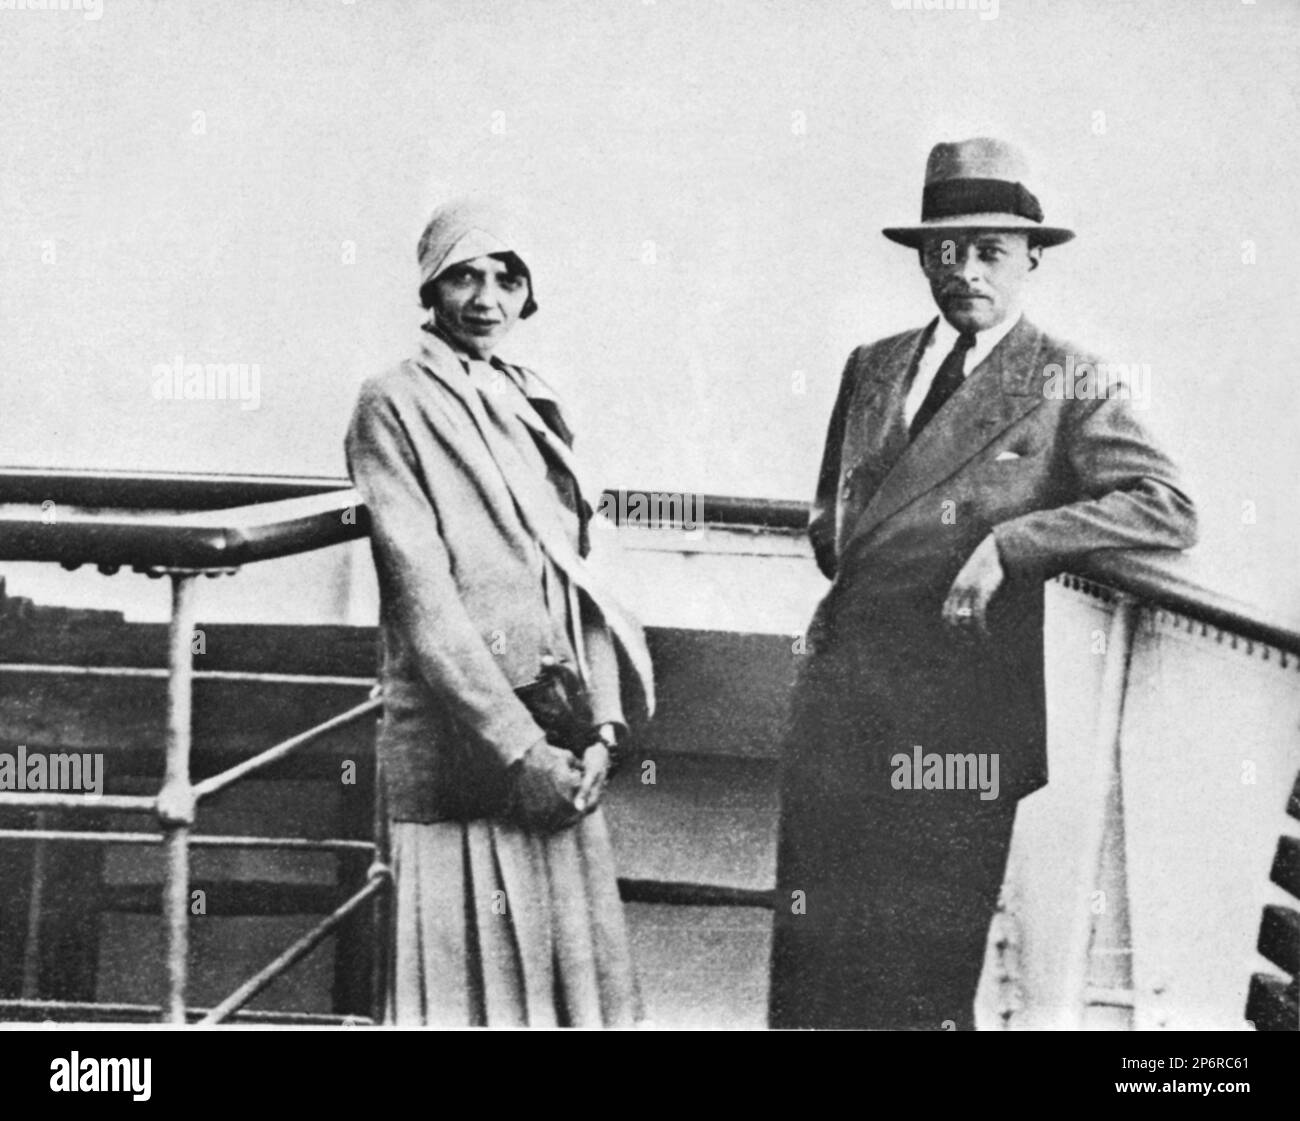 1936 , june, Capri , Italy  : The princess MAFALDA di SAVOIA ( Roma , 19 november 1902 - Buchenwald concentration camp 28 august 1943 ) daughter of  King VITTORIO EMANUELE III and the Queen ELENA ( del Montenegro ) di Savoia.  In this photo, during the travel from Napoli to Capri  with  husband , the german prince Philipp of HESSE Kassel ( Filippo d' ASSIA , 1896 - 1980 ), married three mounths later .- RE - REGINA - CASA SAVOIA - ITALIA - REALI - Nobiltà  ITALIANA - SAVOY - NOBILITY - ROYALTY - HISTORY - FOTO STORICHE  ---- Archivio GBB Stock Photo